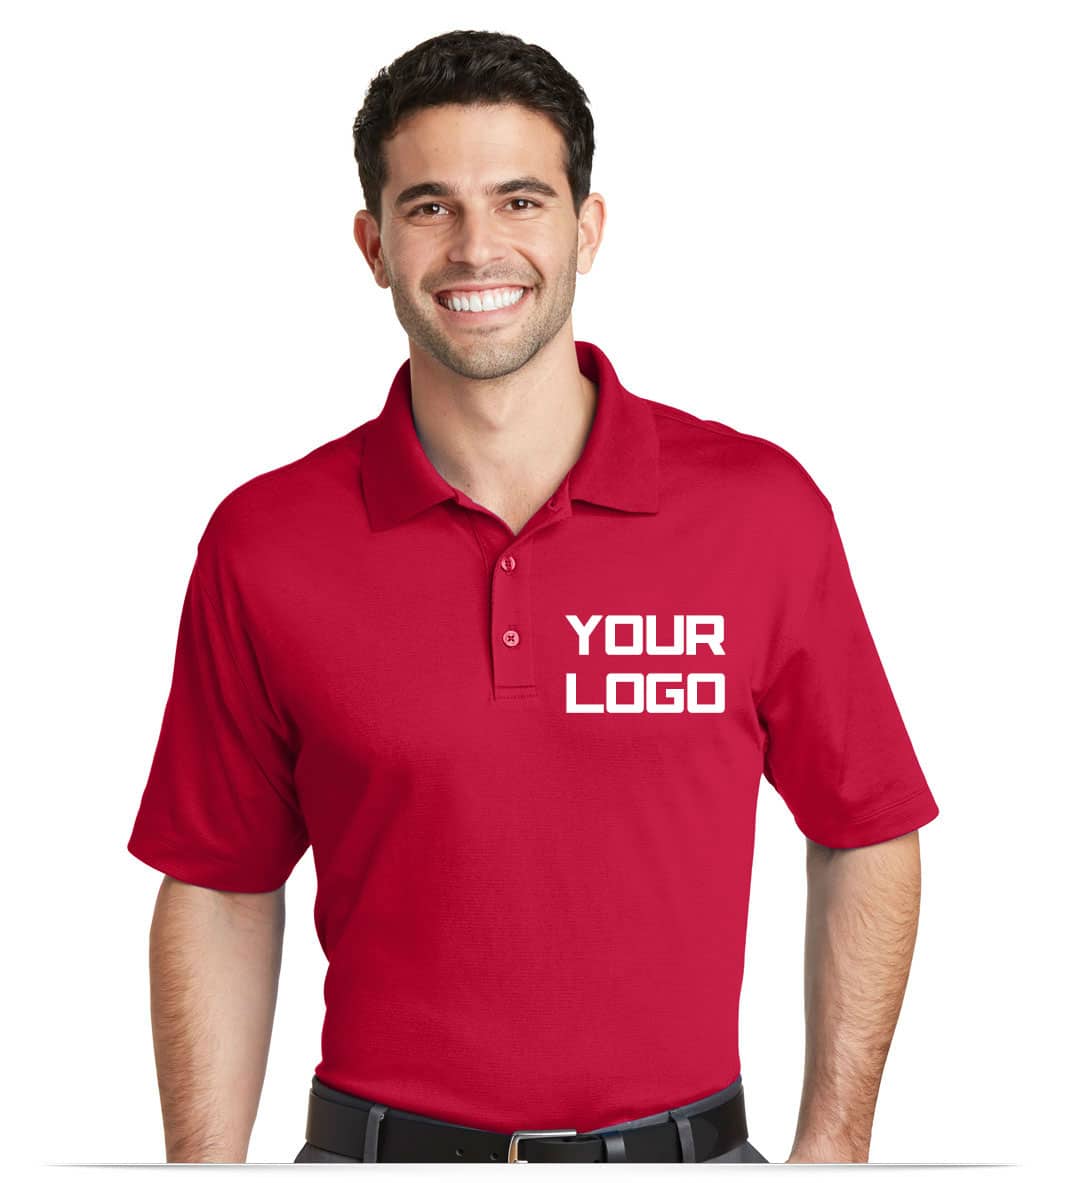 Custom Work Polo Shirt with Your Logo Online at AllStar Logo.